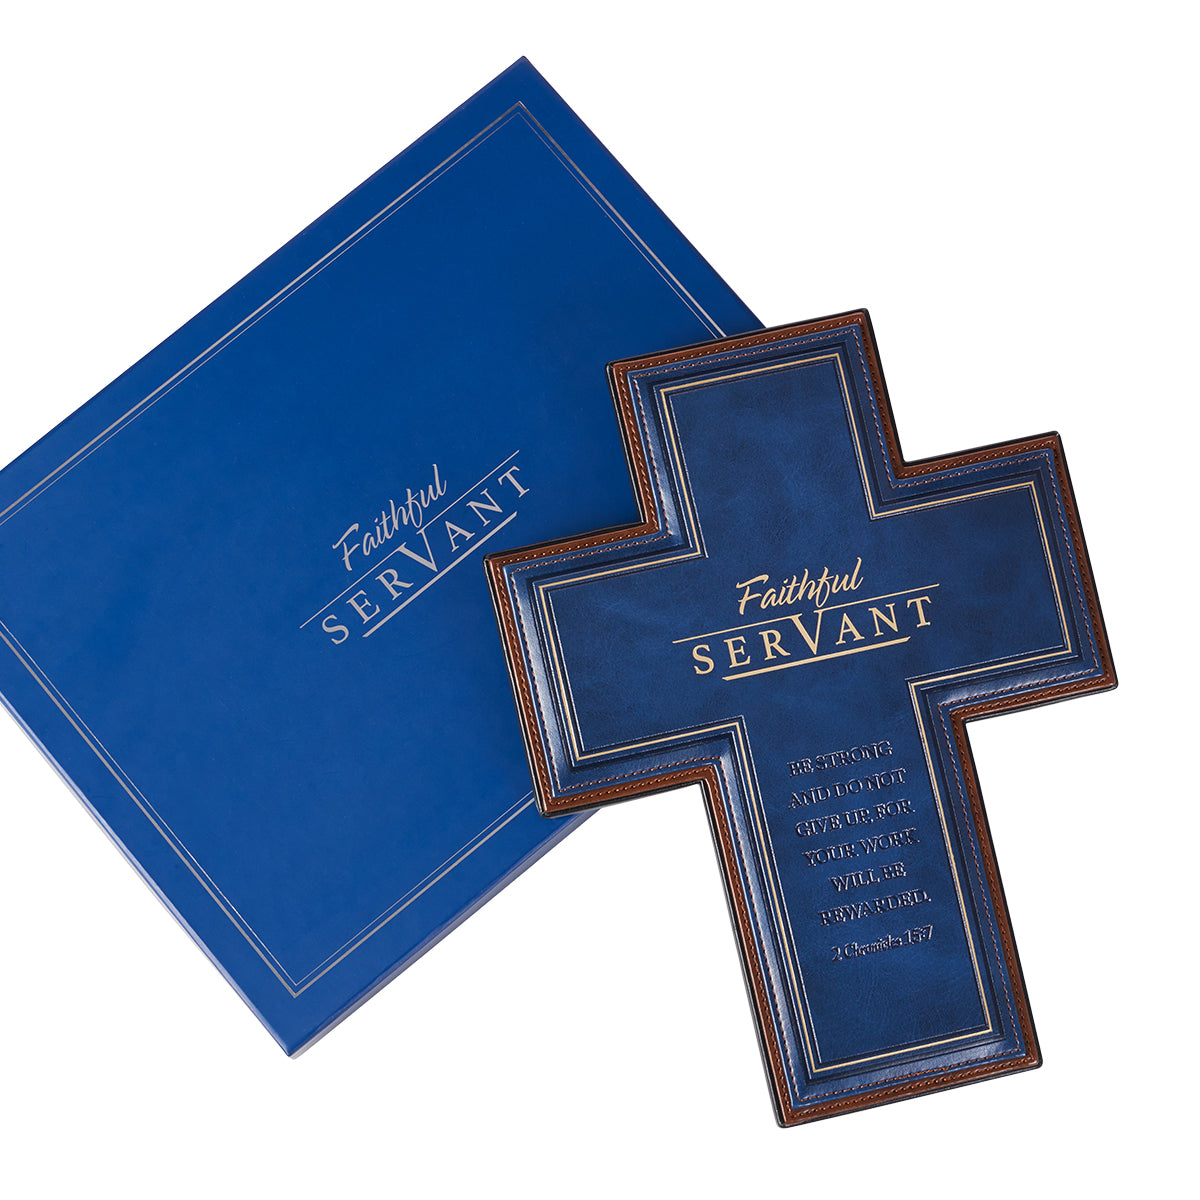 Image of Faithful Servant Faux Leather Desktop Cross - 2 Chronicles 15:7 other